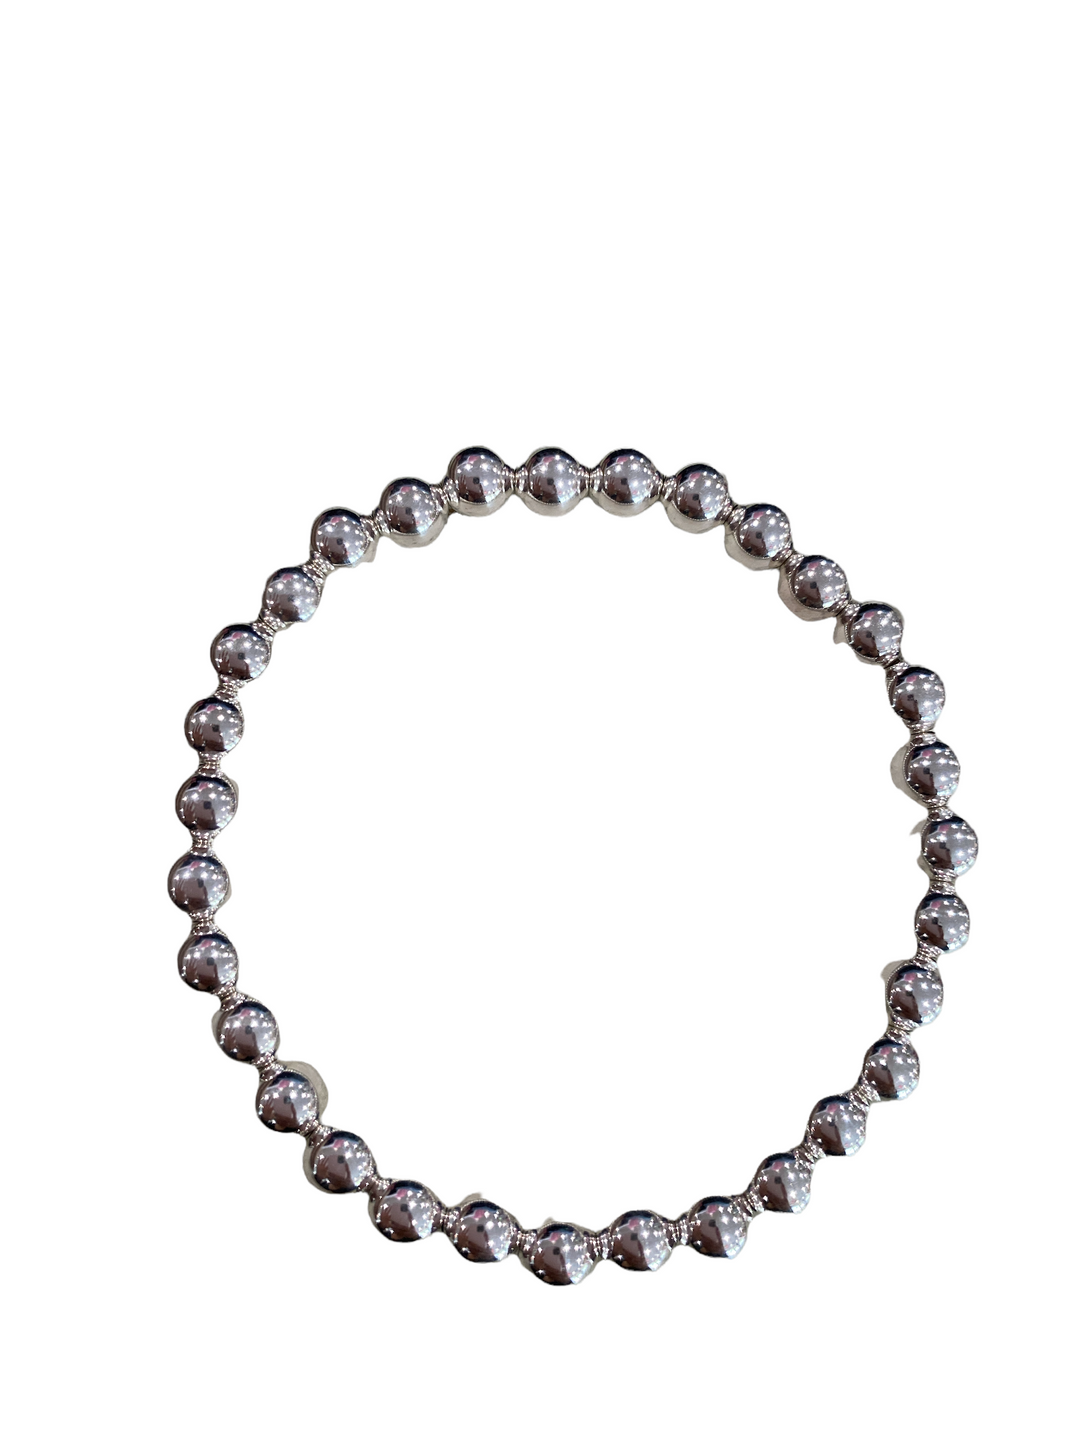 SILVER 6mm CLASSIC BEAD BRACELET - Kingfisher Road - Online Boutique